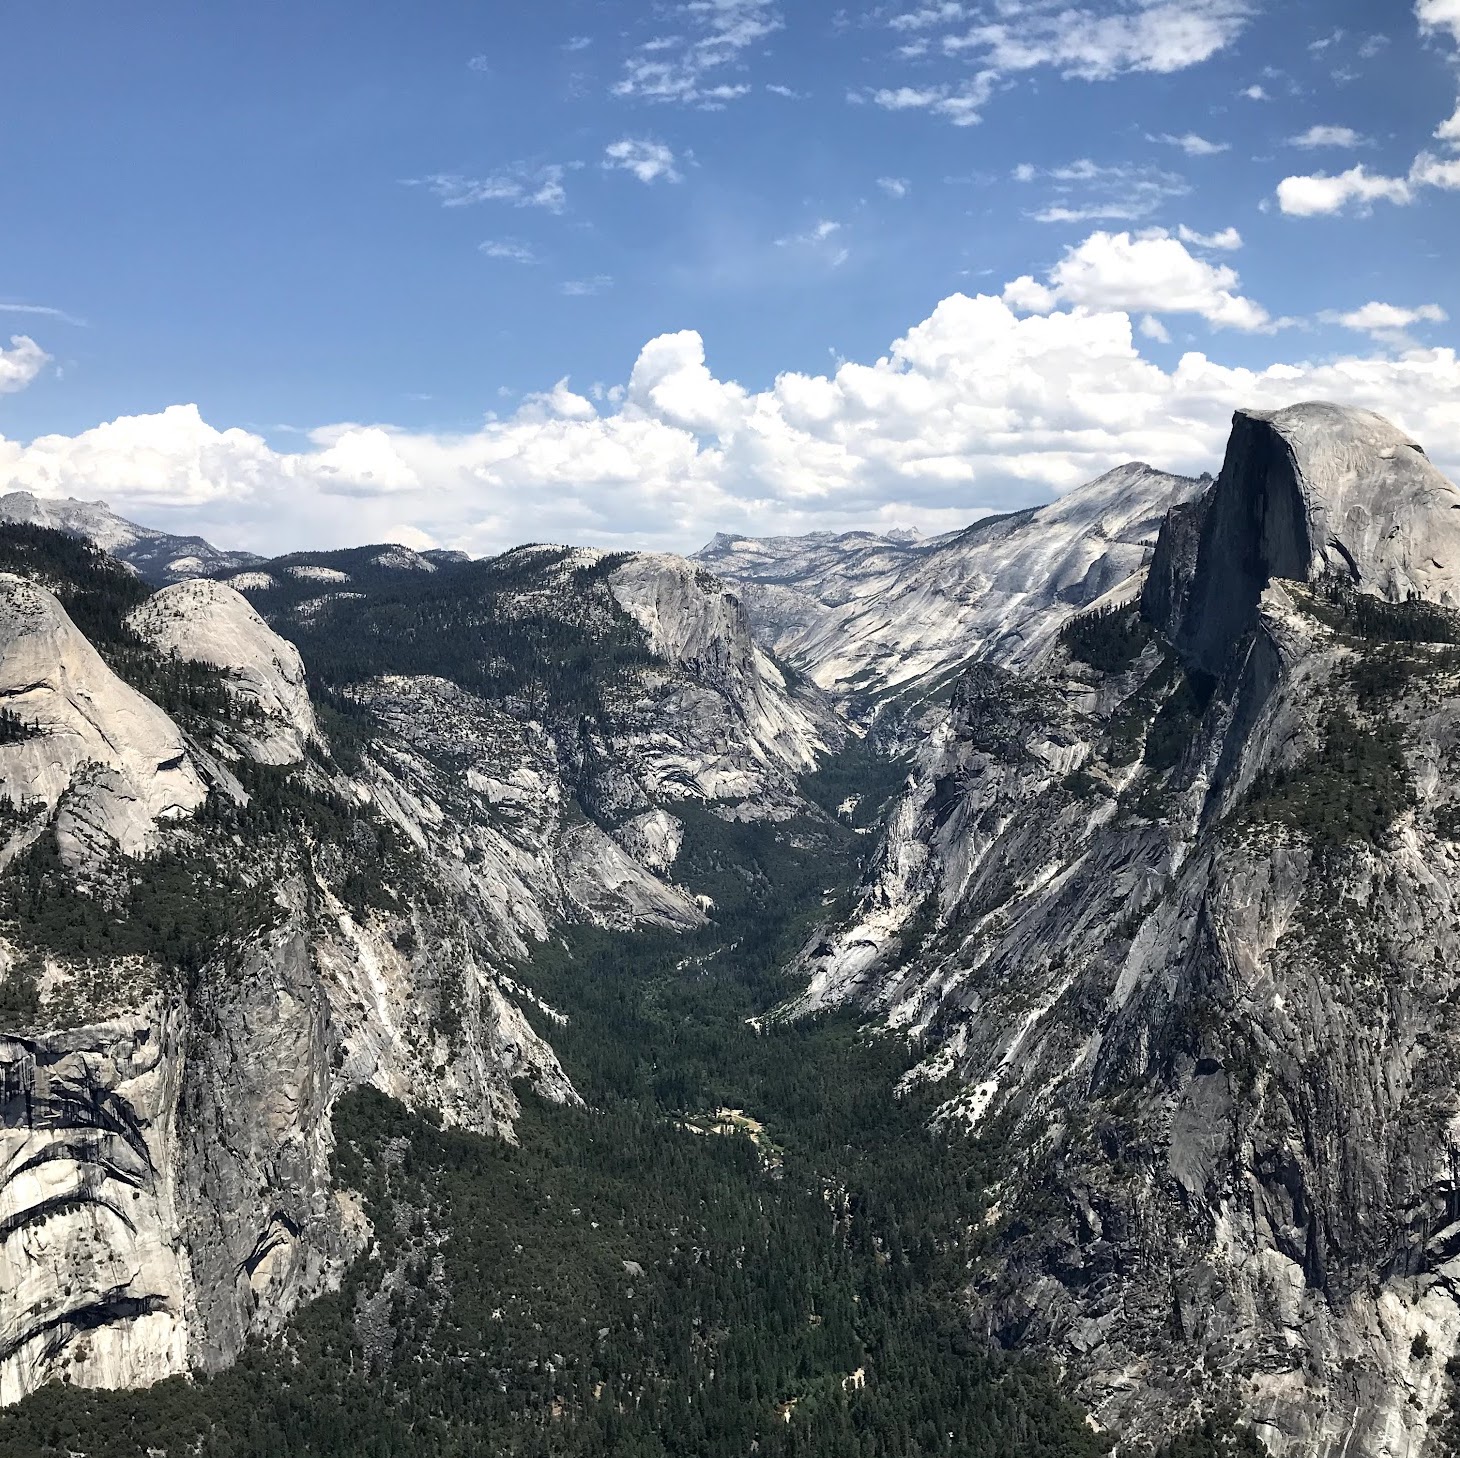 Image of mountains in Yosemite National Park